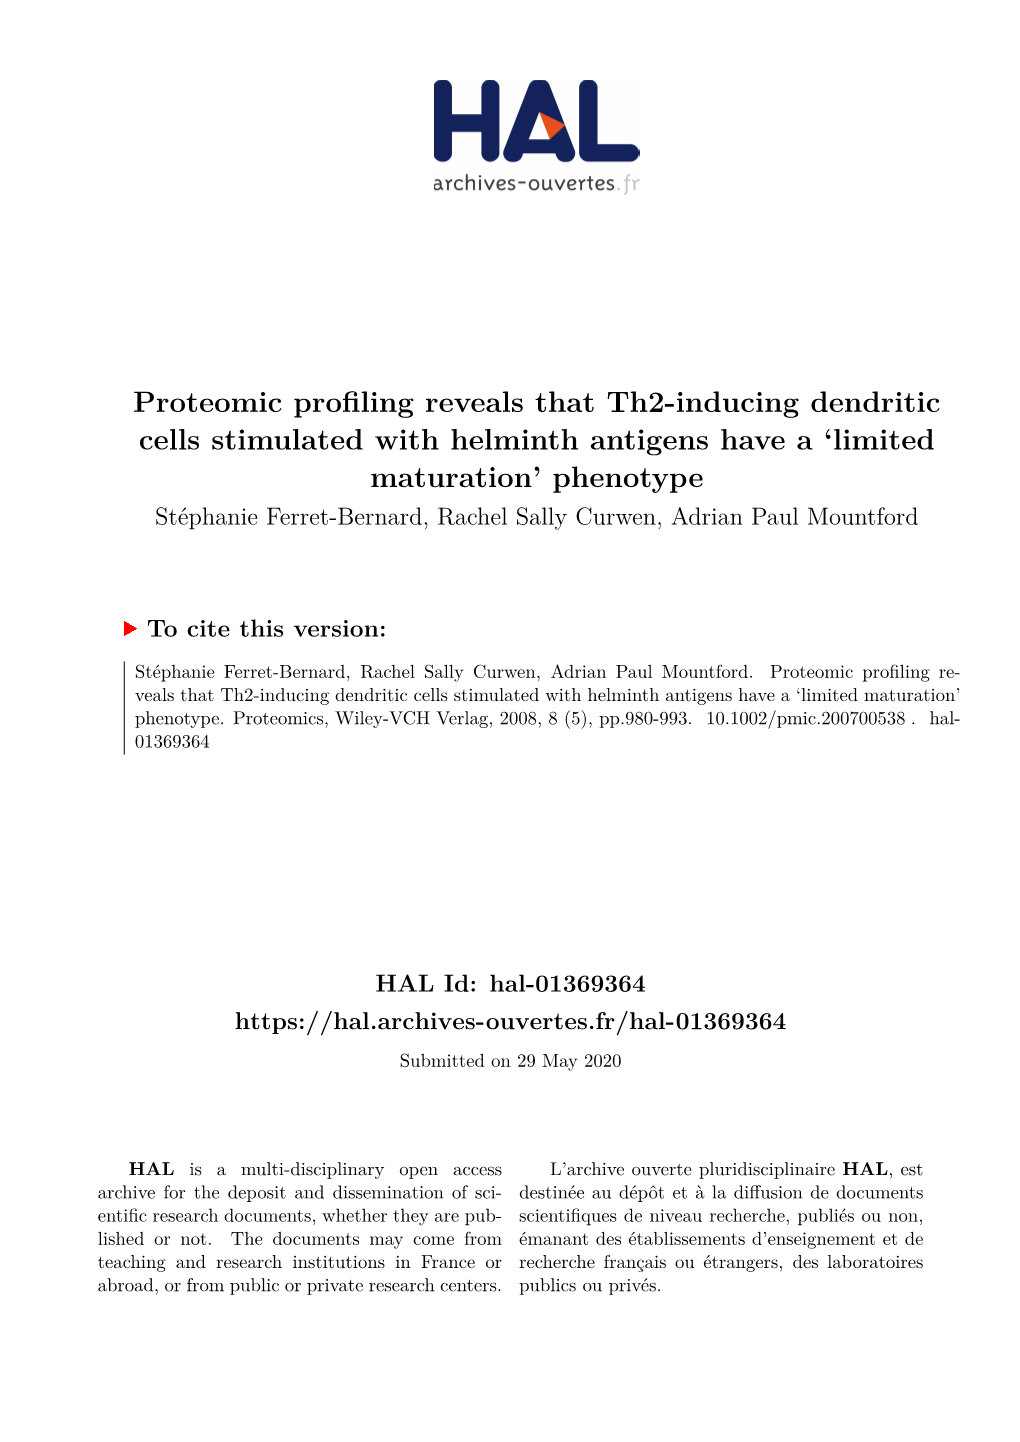 Proteomic Profiling Reveals That Th2-Inducing